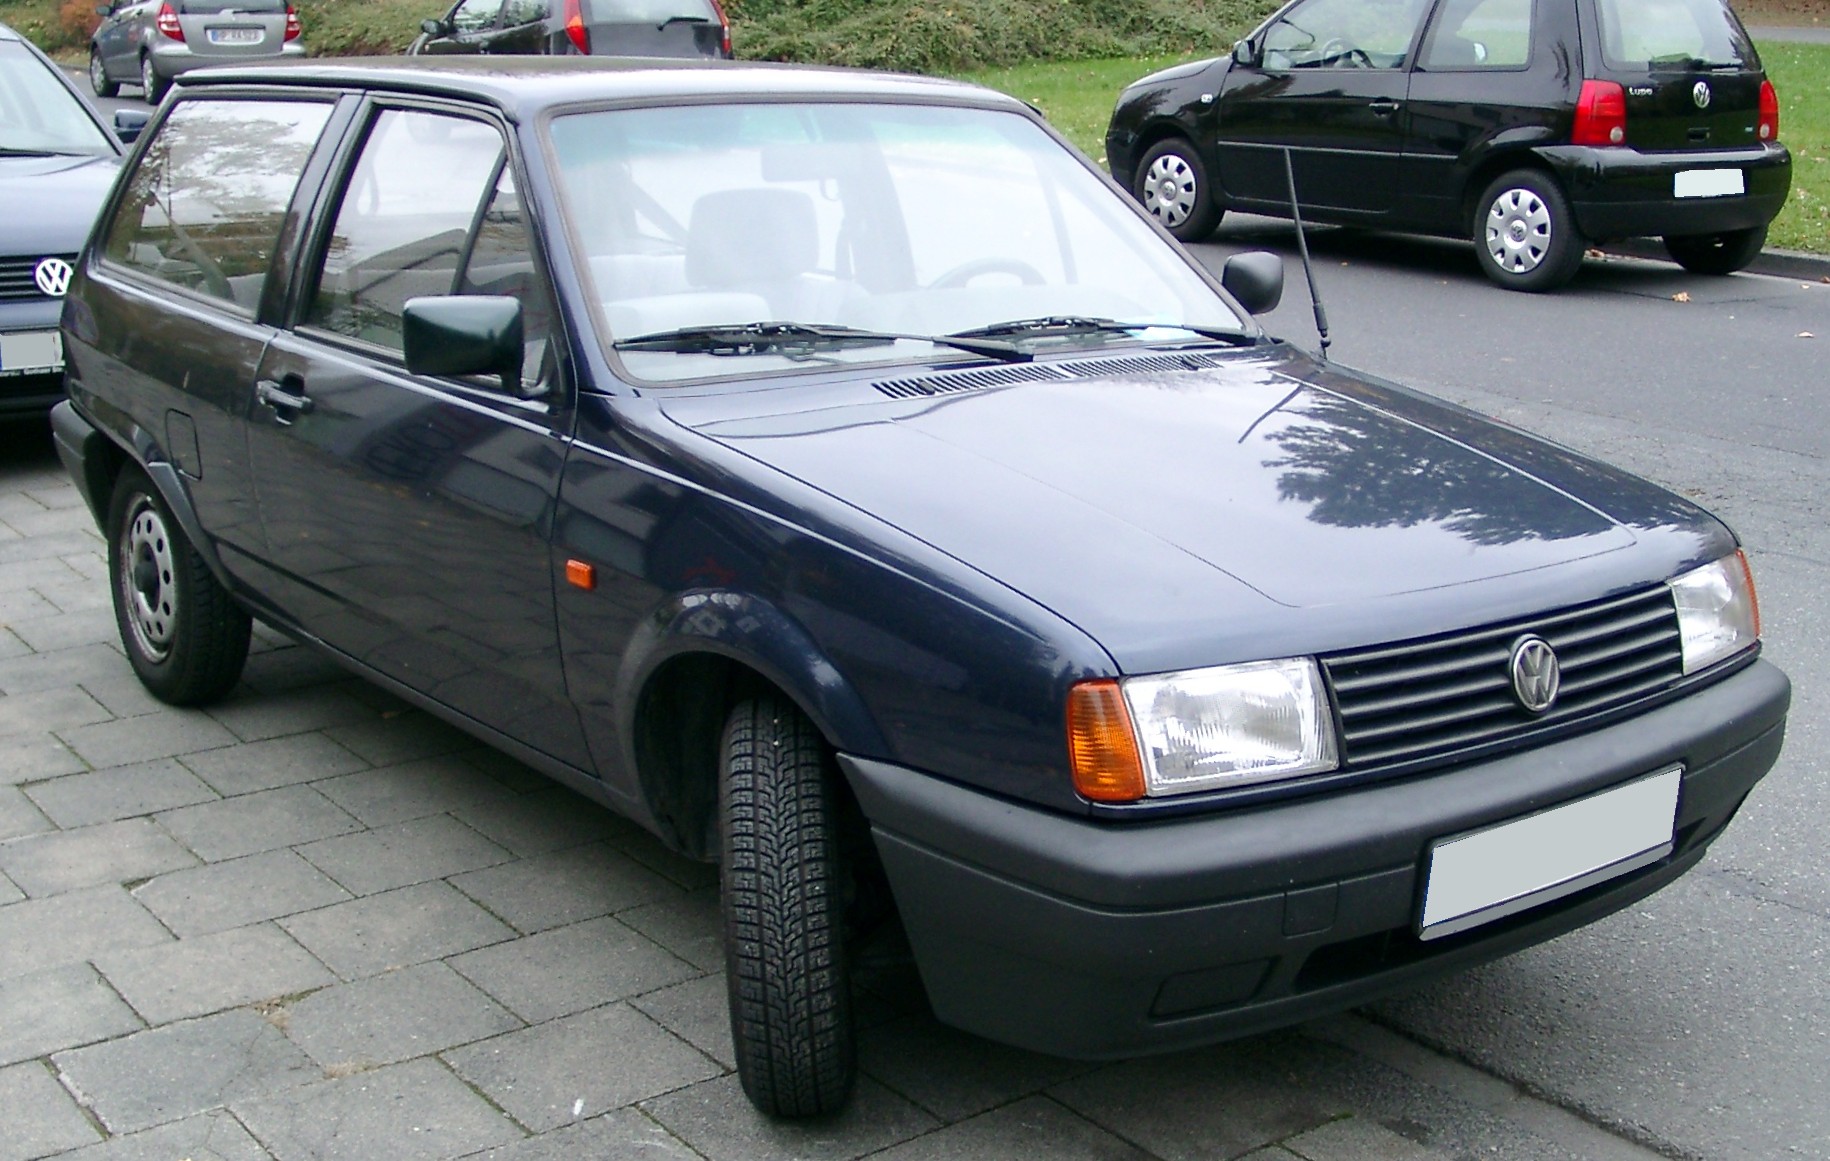 File:VW Caddy front 20071026.jpg - Wikimedia Commons